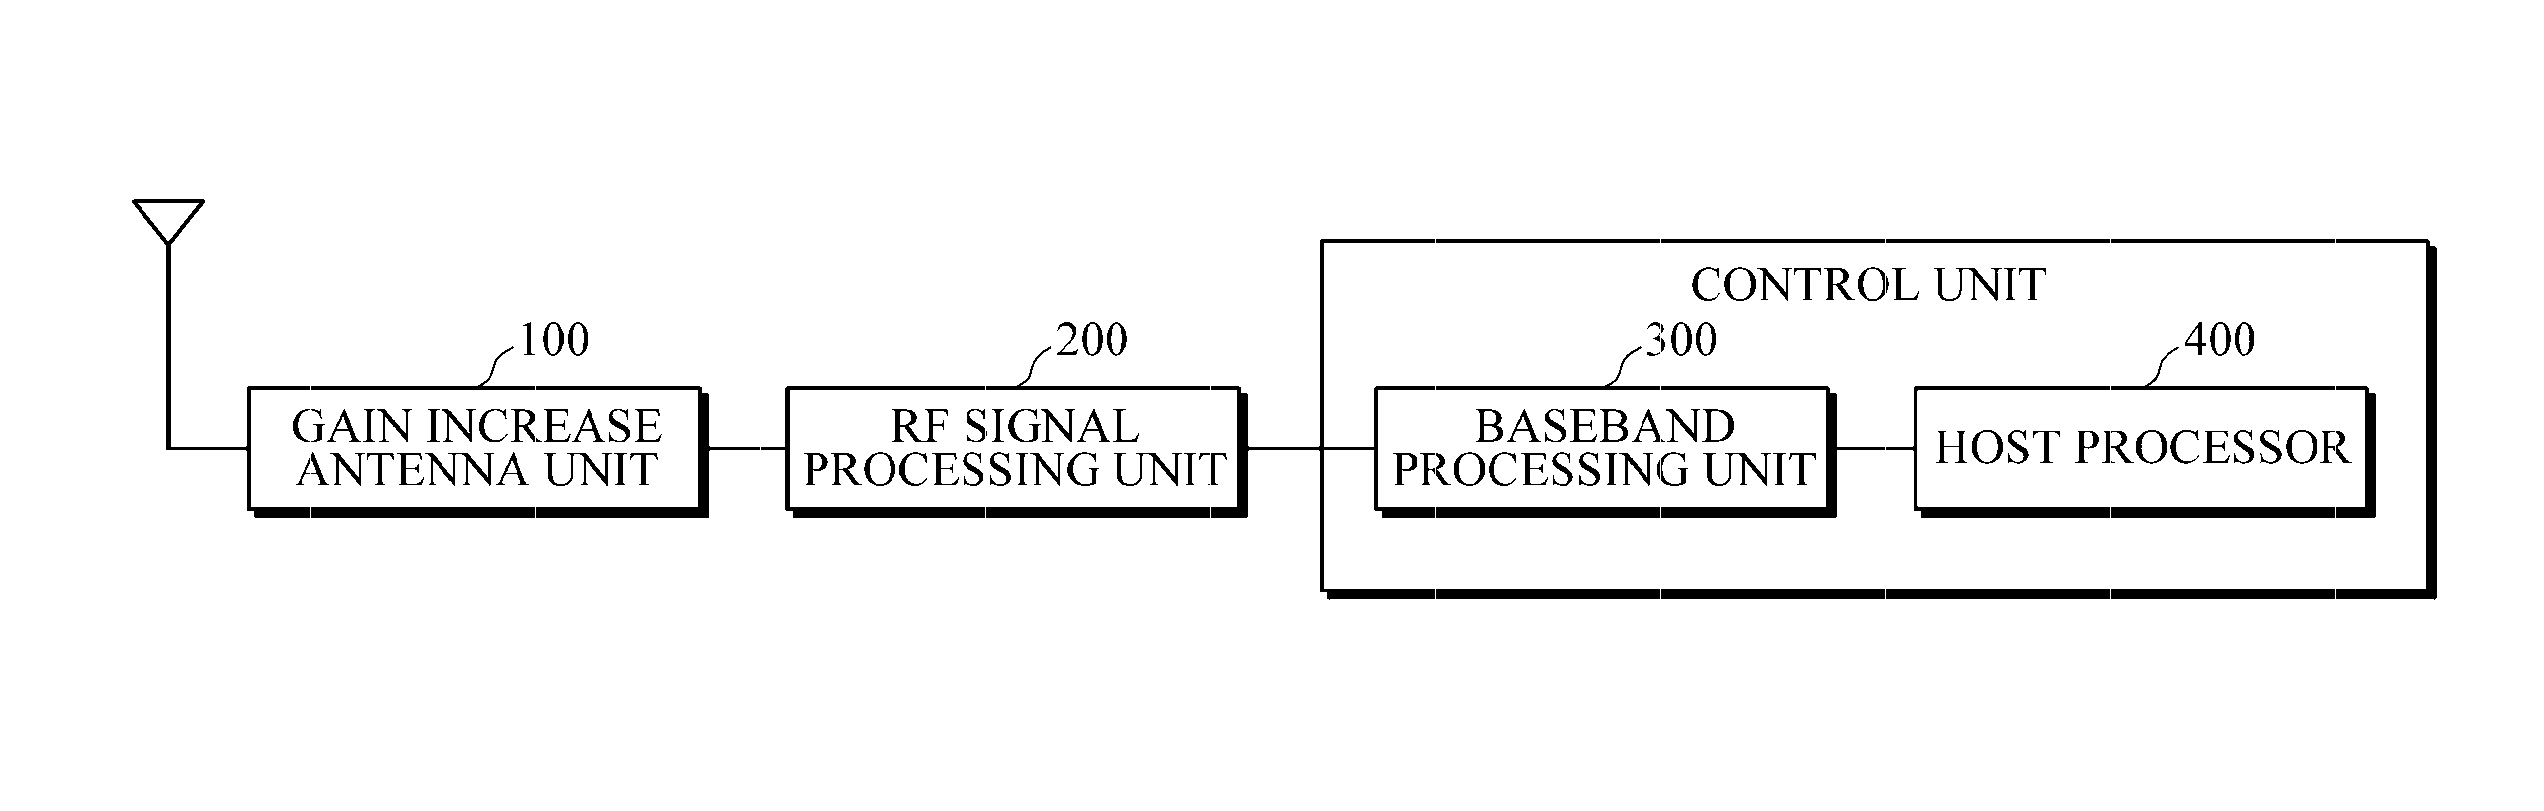 Mobile communication terminal device equipped with replaceable communication module and back cover thereof